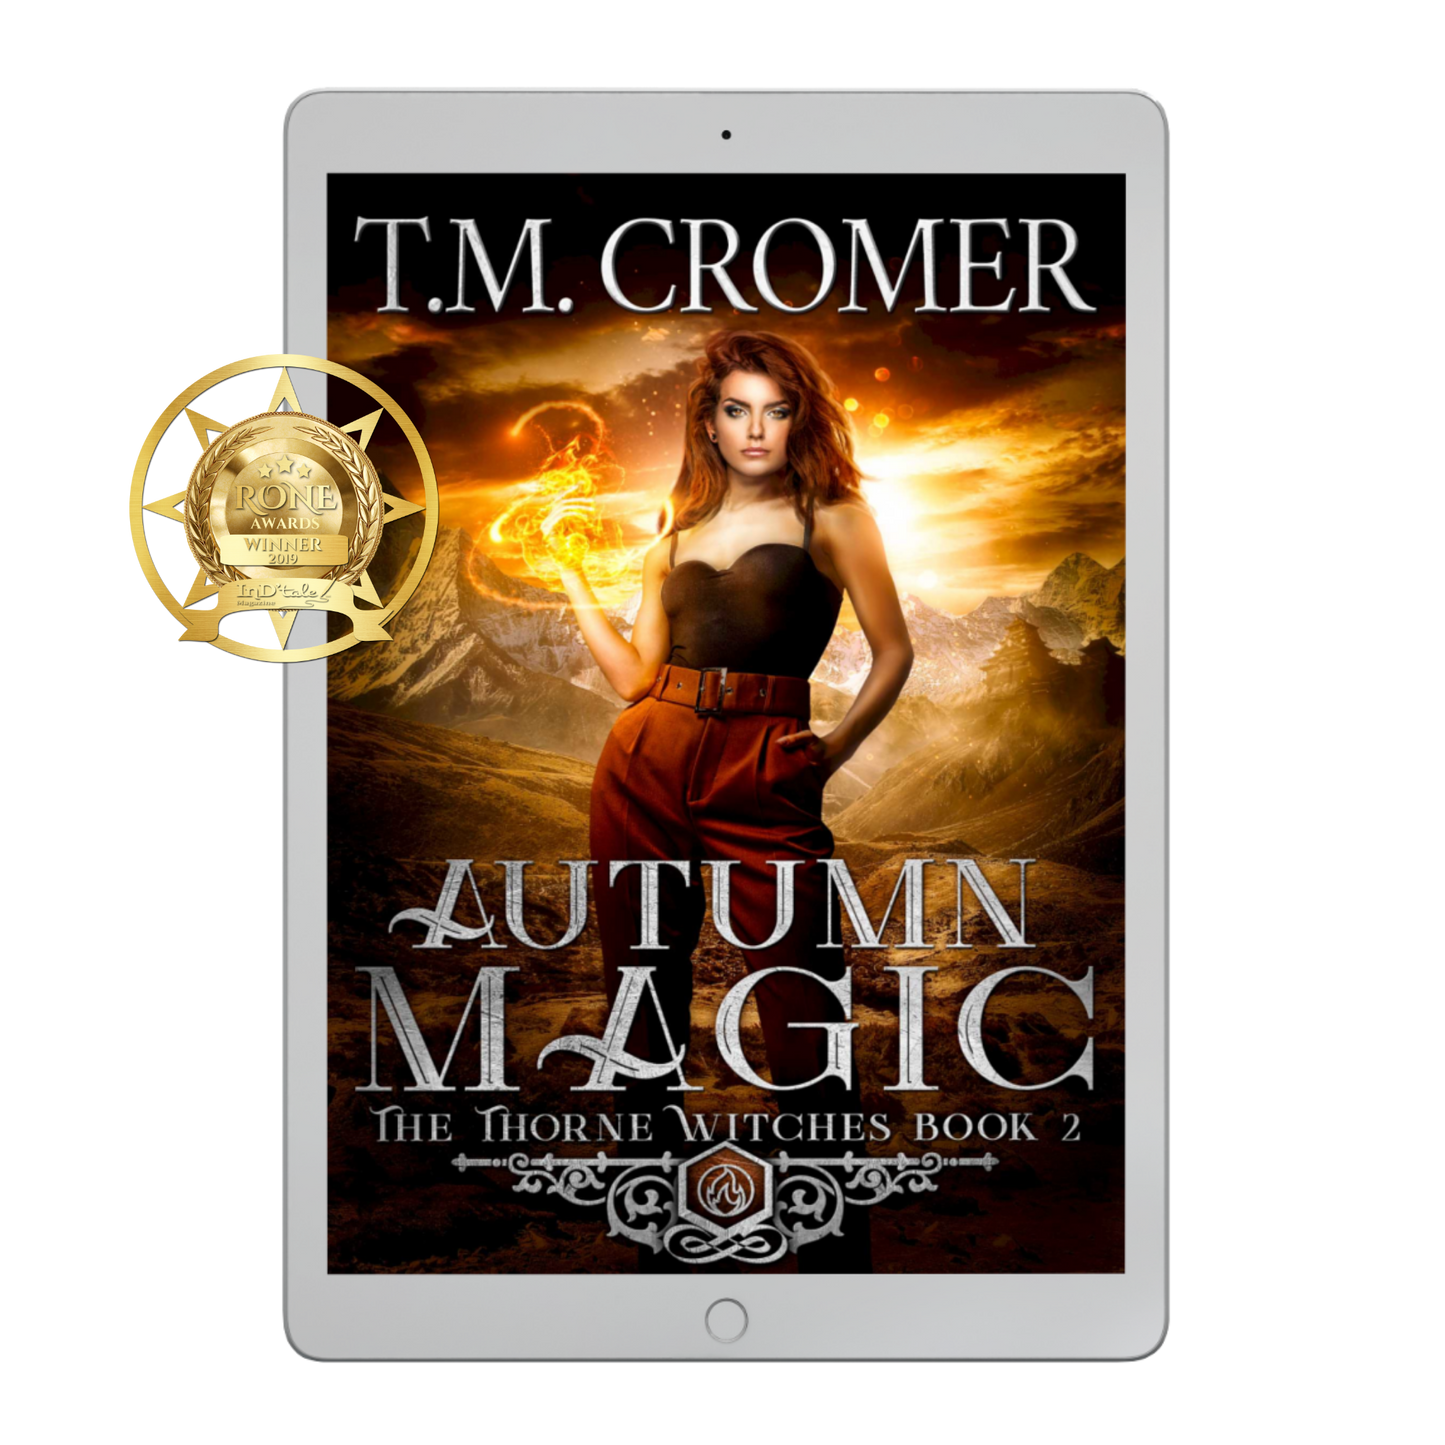 Autumn Magic EBook The Thorne Witches #2 Paranormal Romance, Urban Fantasy, Magical Realism